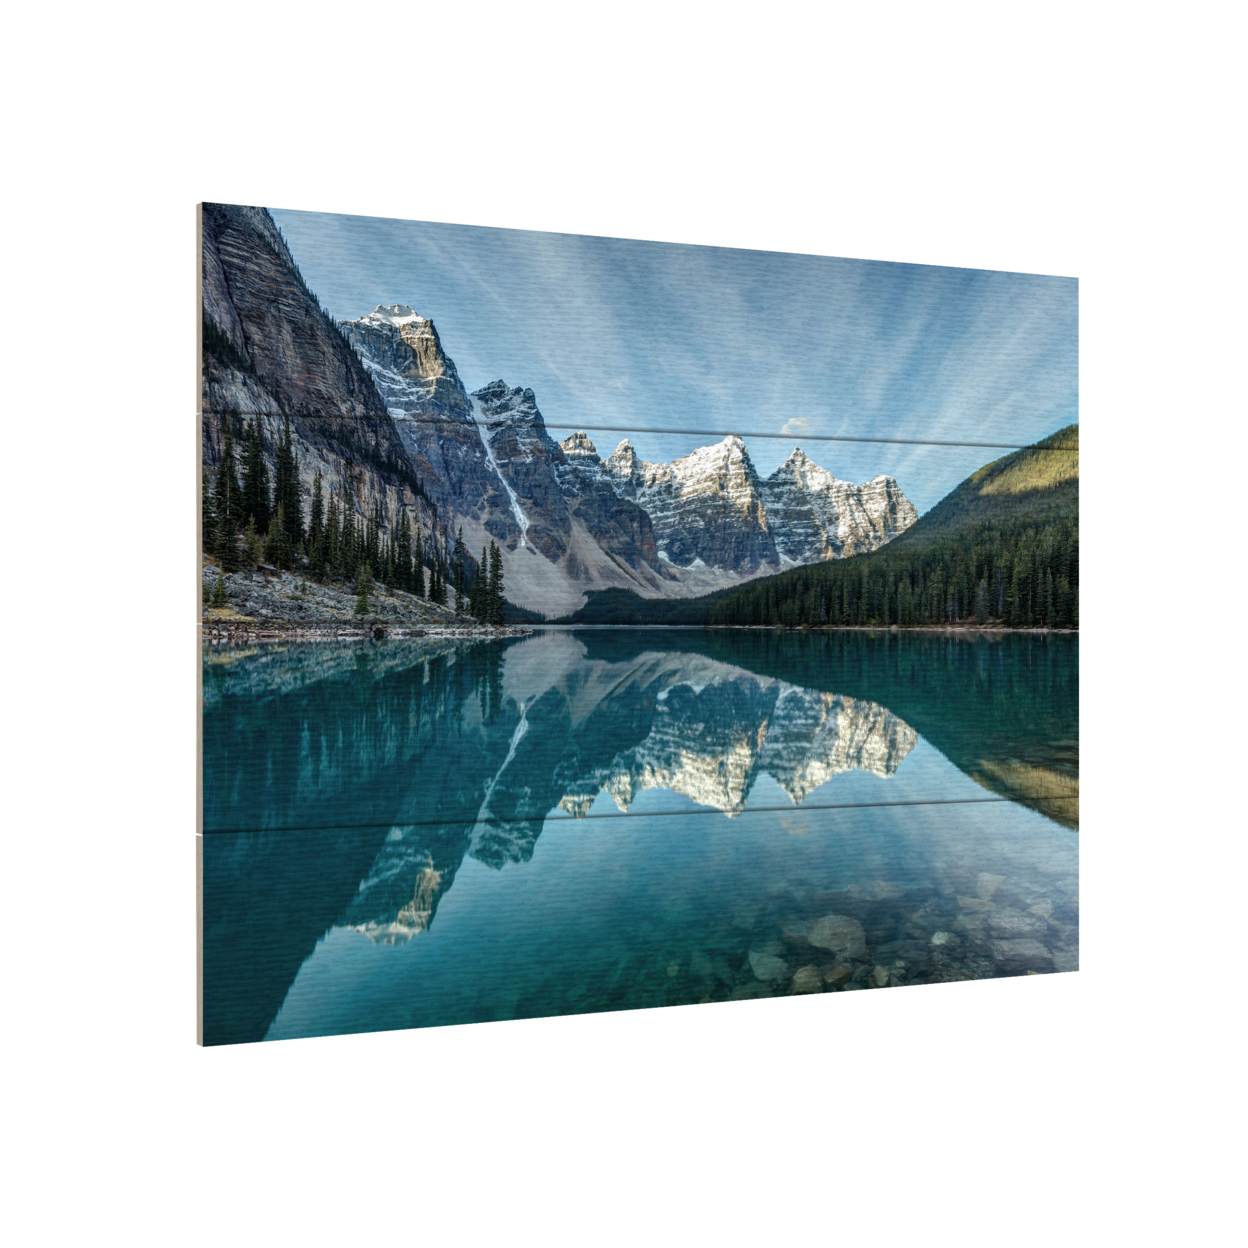 Wall Art 12 X 16 Inches Titled Moraine Lake Reflection Ready To Hang Printed On Wooden Planks